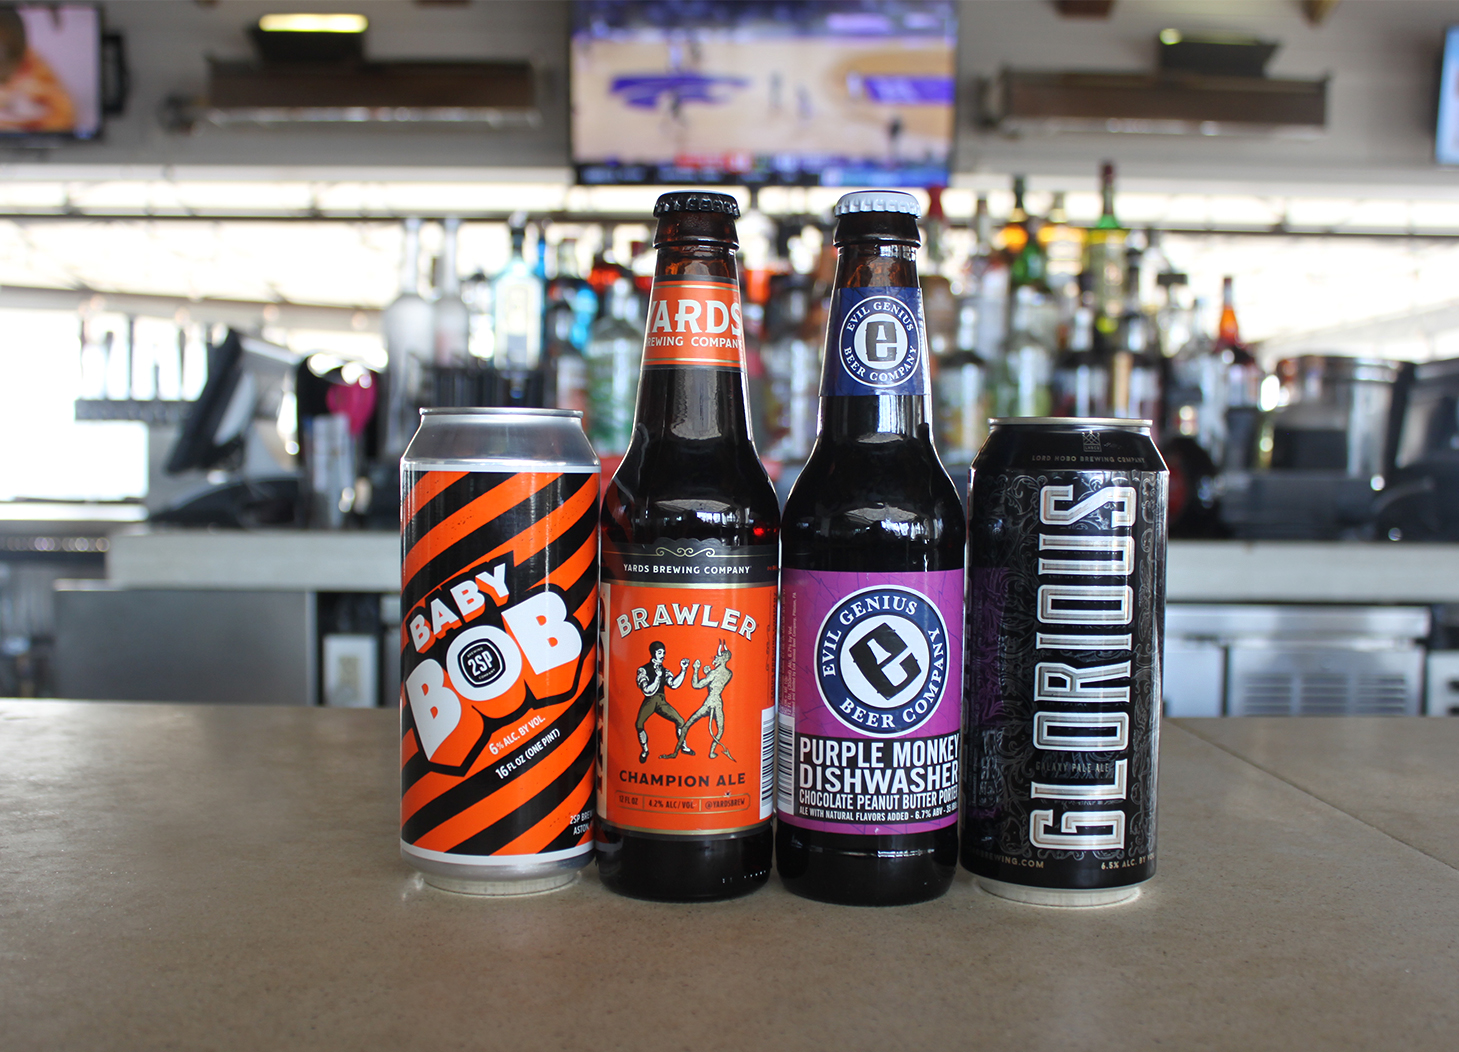 Four craft beers with Tavola bar in the background including an orange and black can of Baby Bob, an orange labeled bottled of Yards Brawler, a purple labeled bottle of Even Genius Purple Monkey and a black and sliver can of Glorious beer.